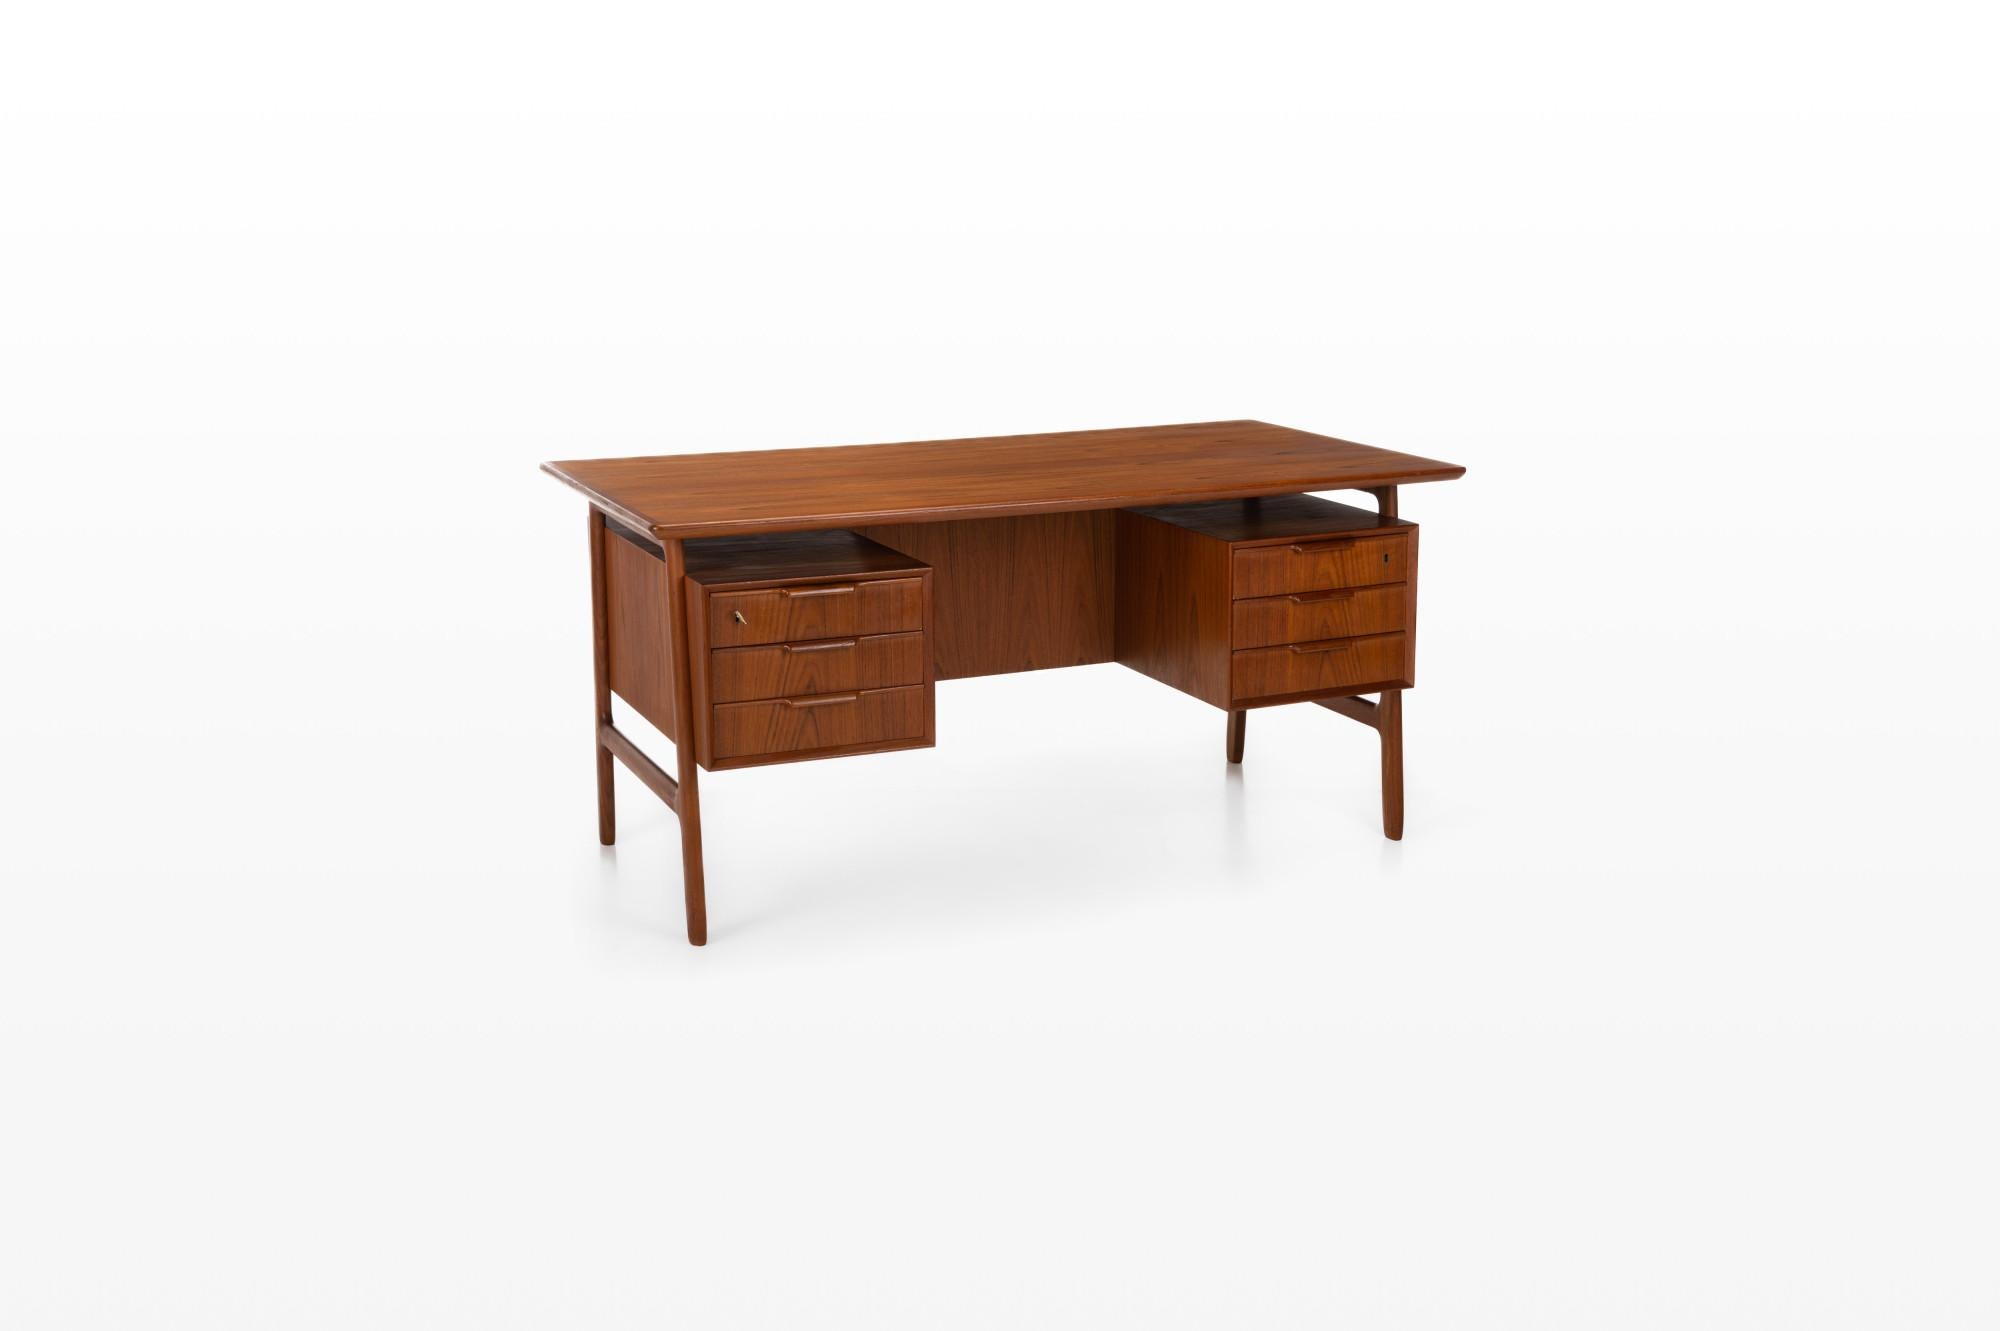 This beautiful teak desk was designed for Omann Jun Møbelfabrik in Denmark, model 75. The freestanding desk has a floating desktop. It has six drawers and is in very good condition. Sticker is still present.